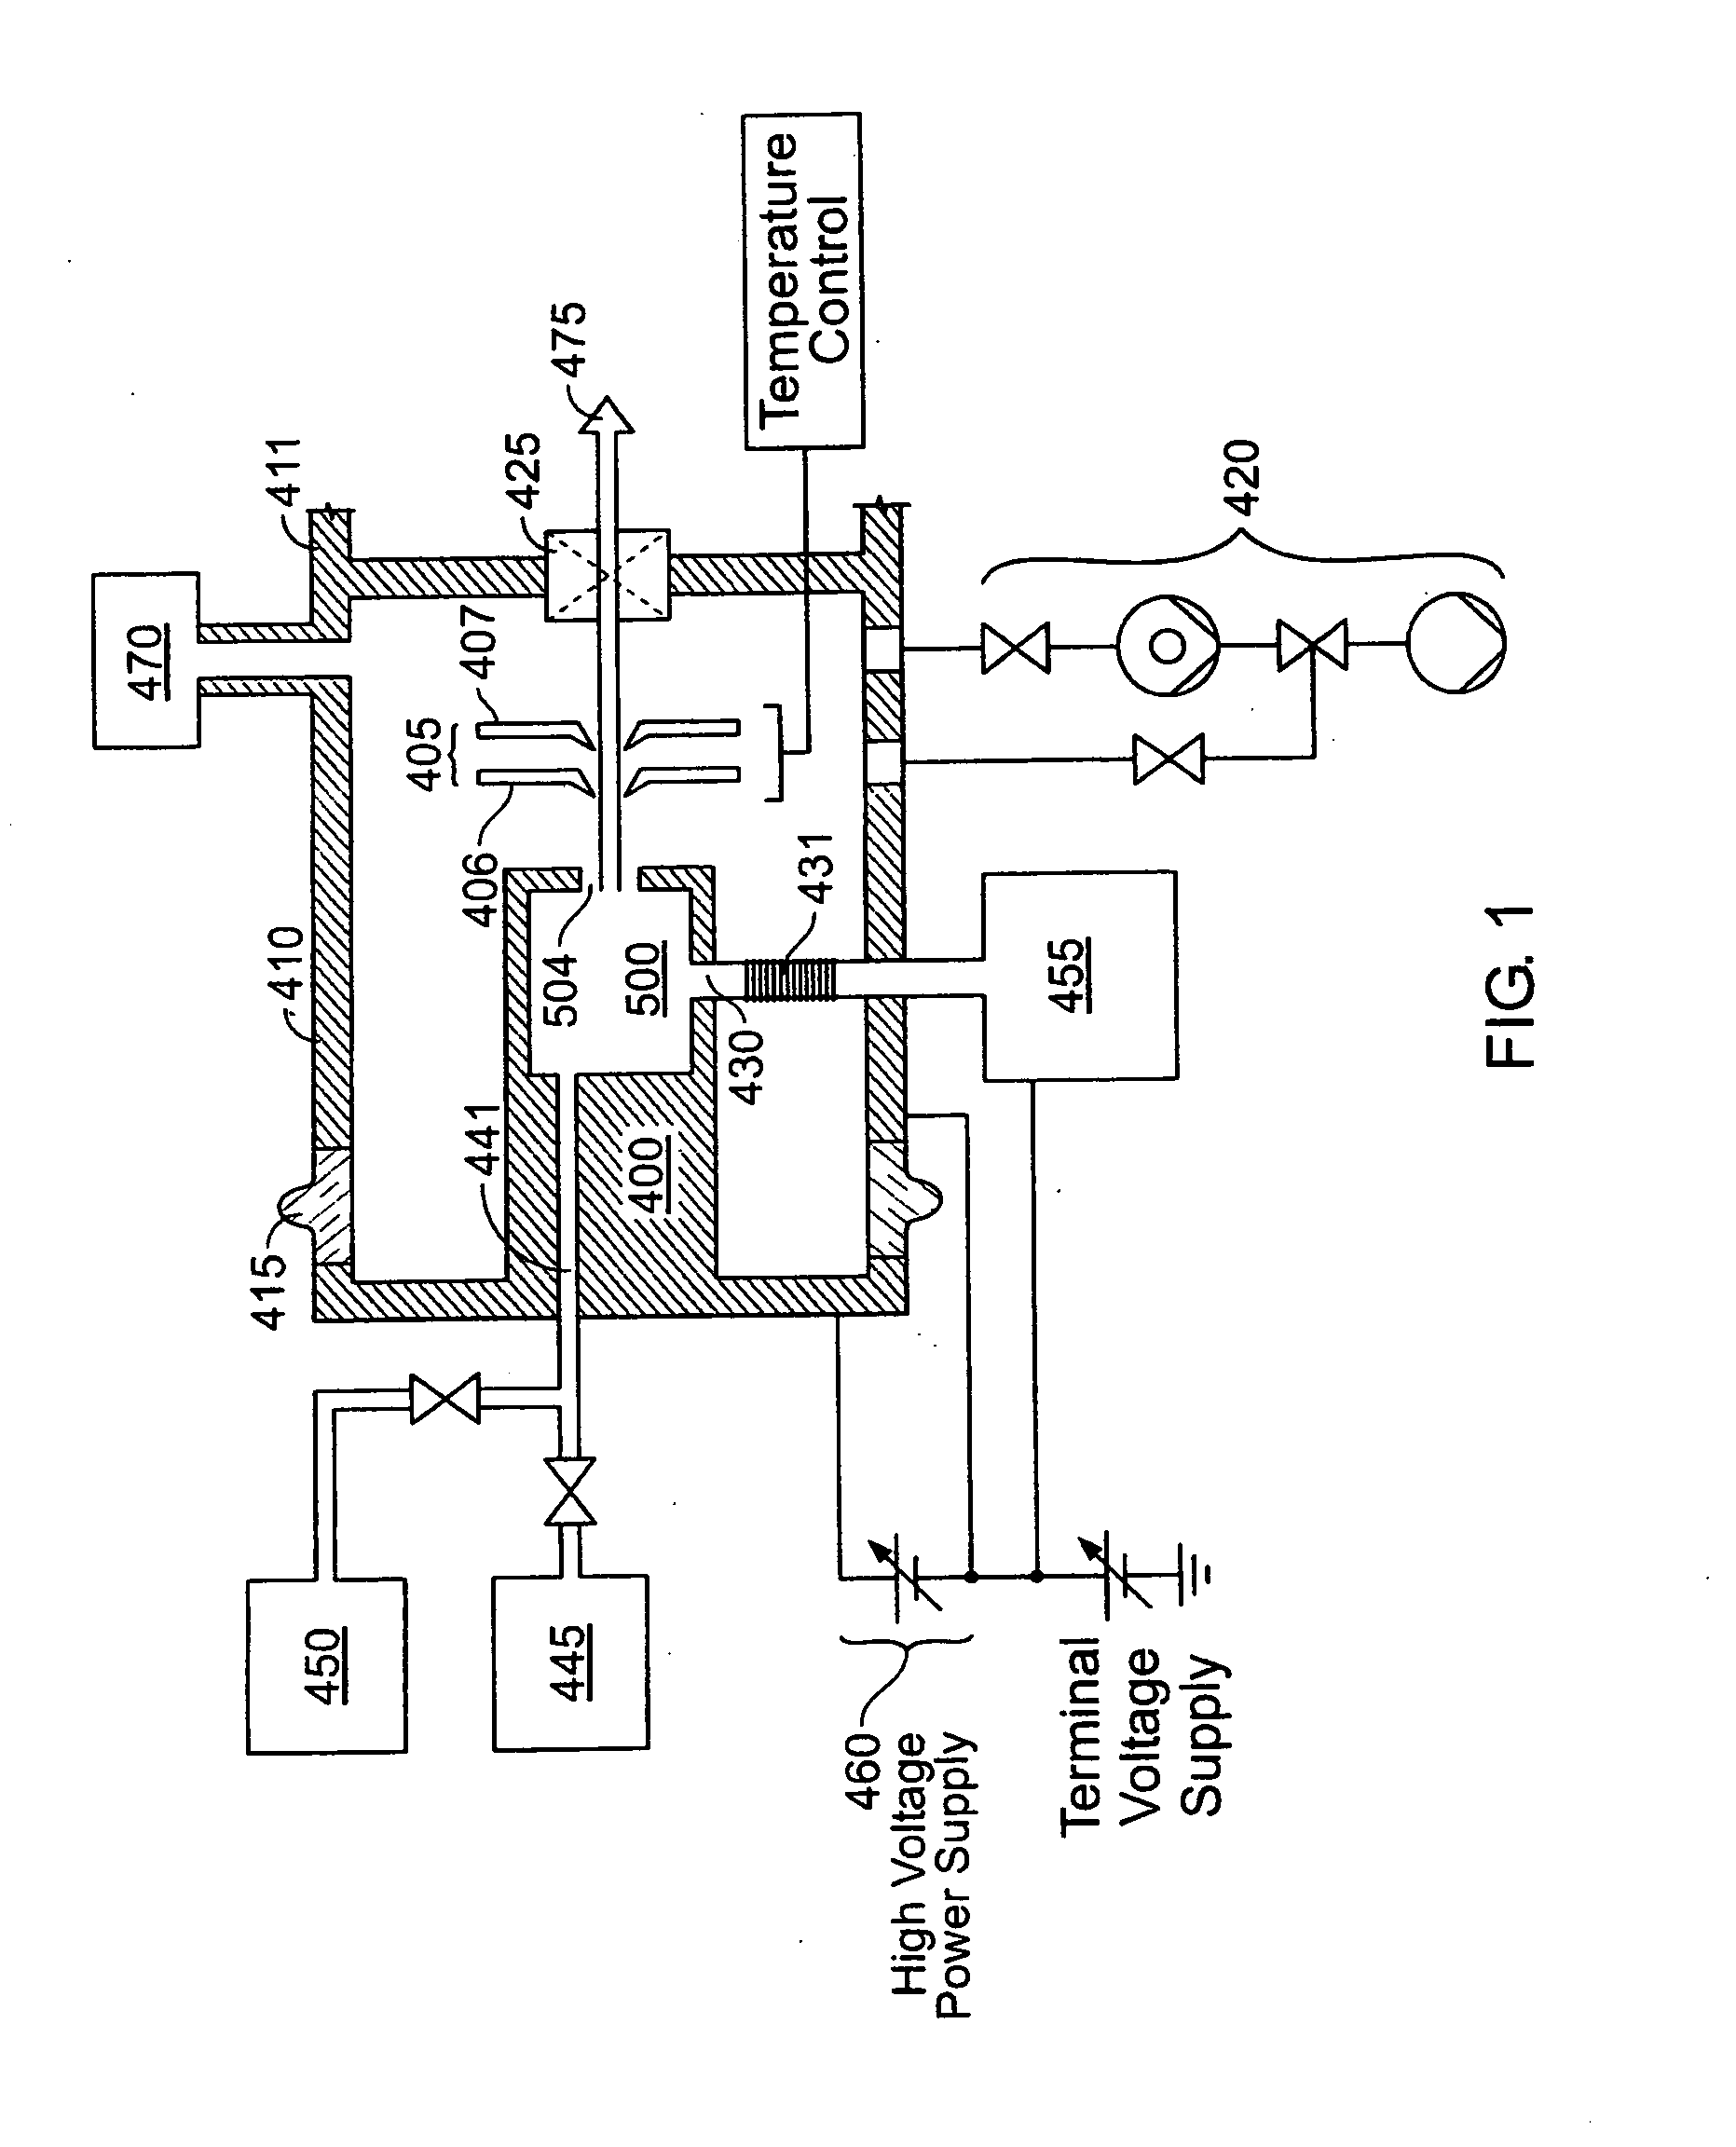 Method and apparatus for extracting ions from an ion source for use in ion implantation